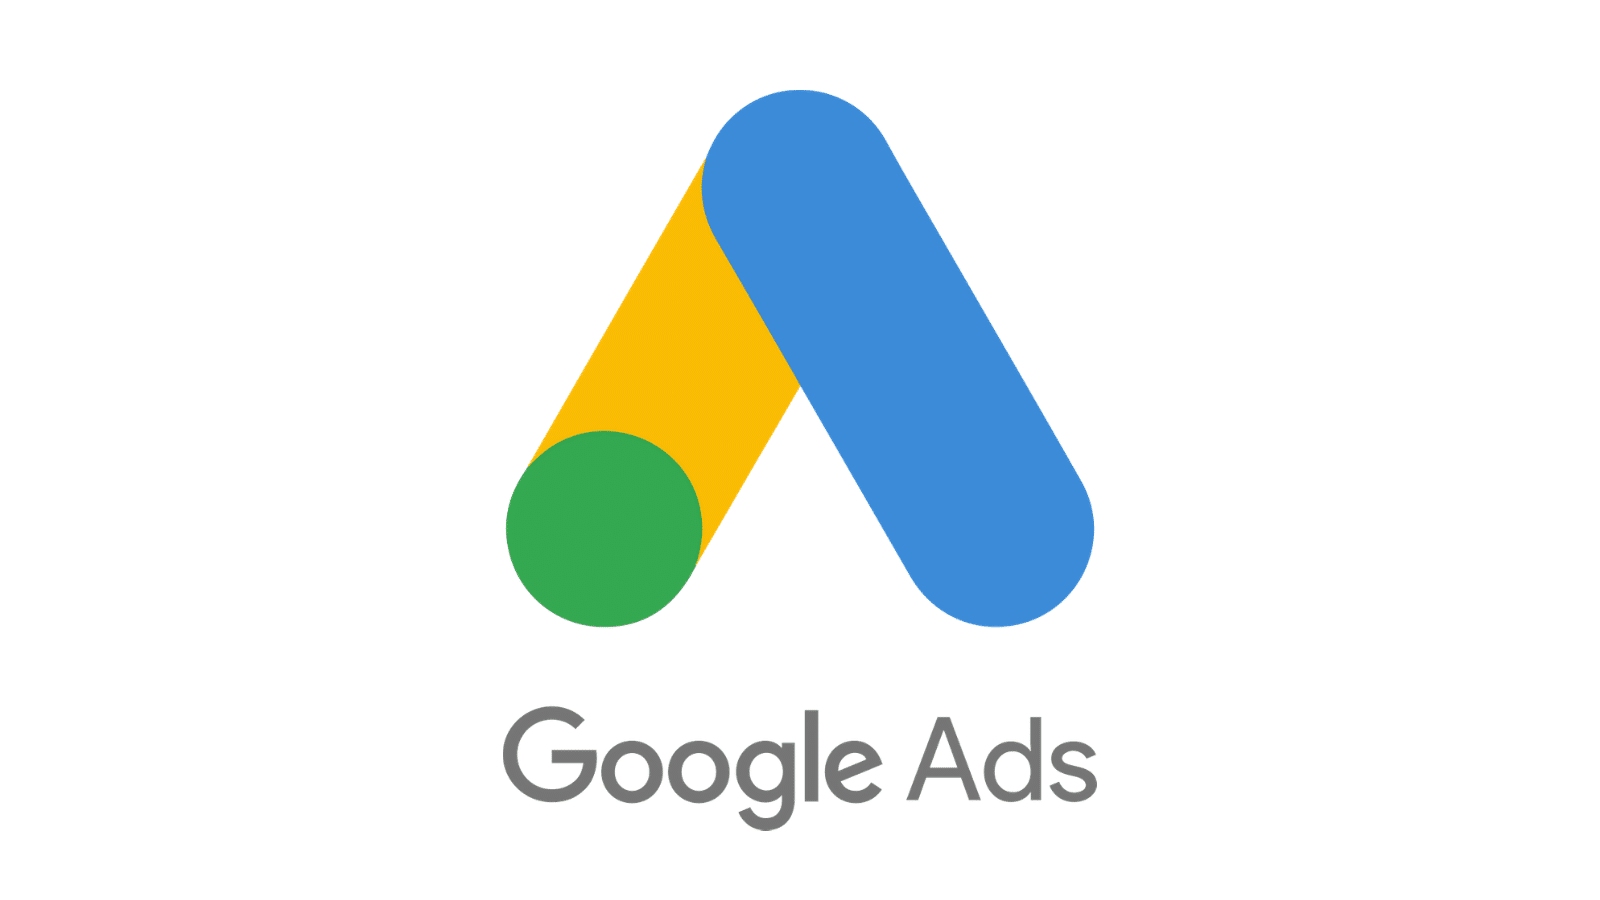 Google Ads Introduces New Feature Of AI-Powered Creative Guidance